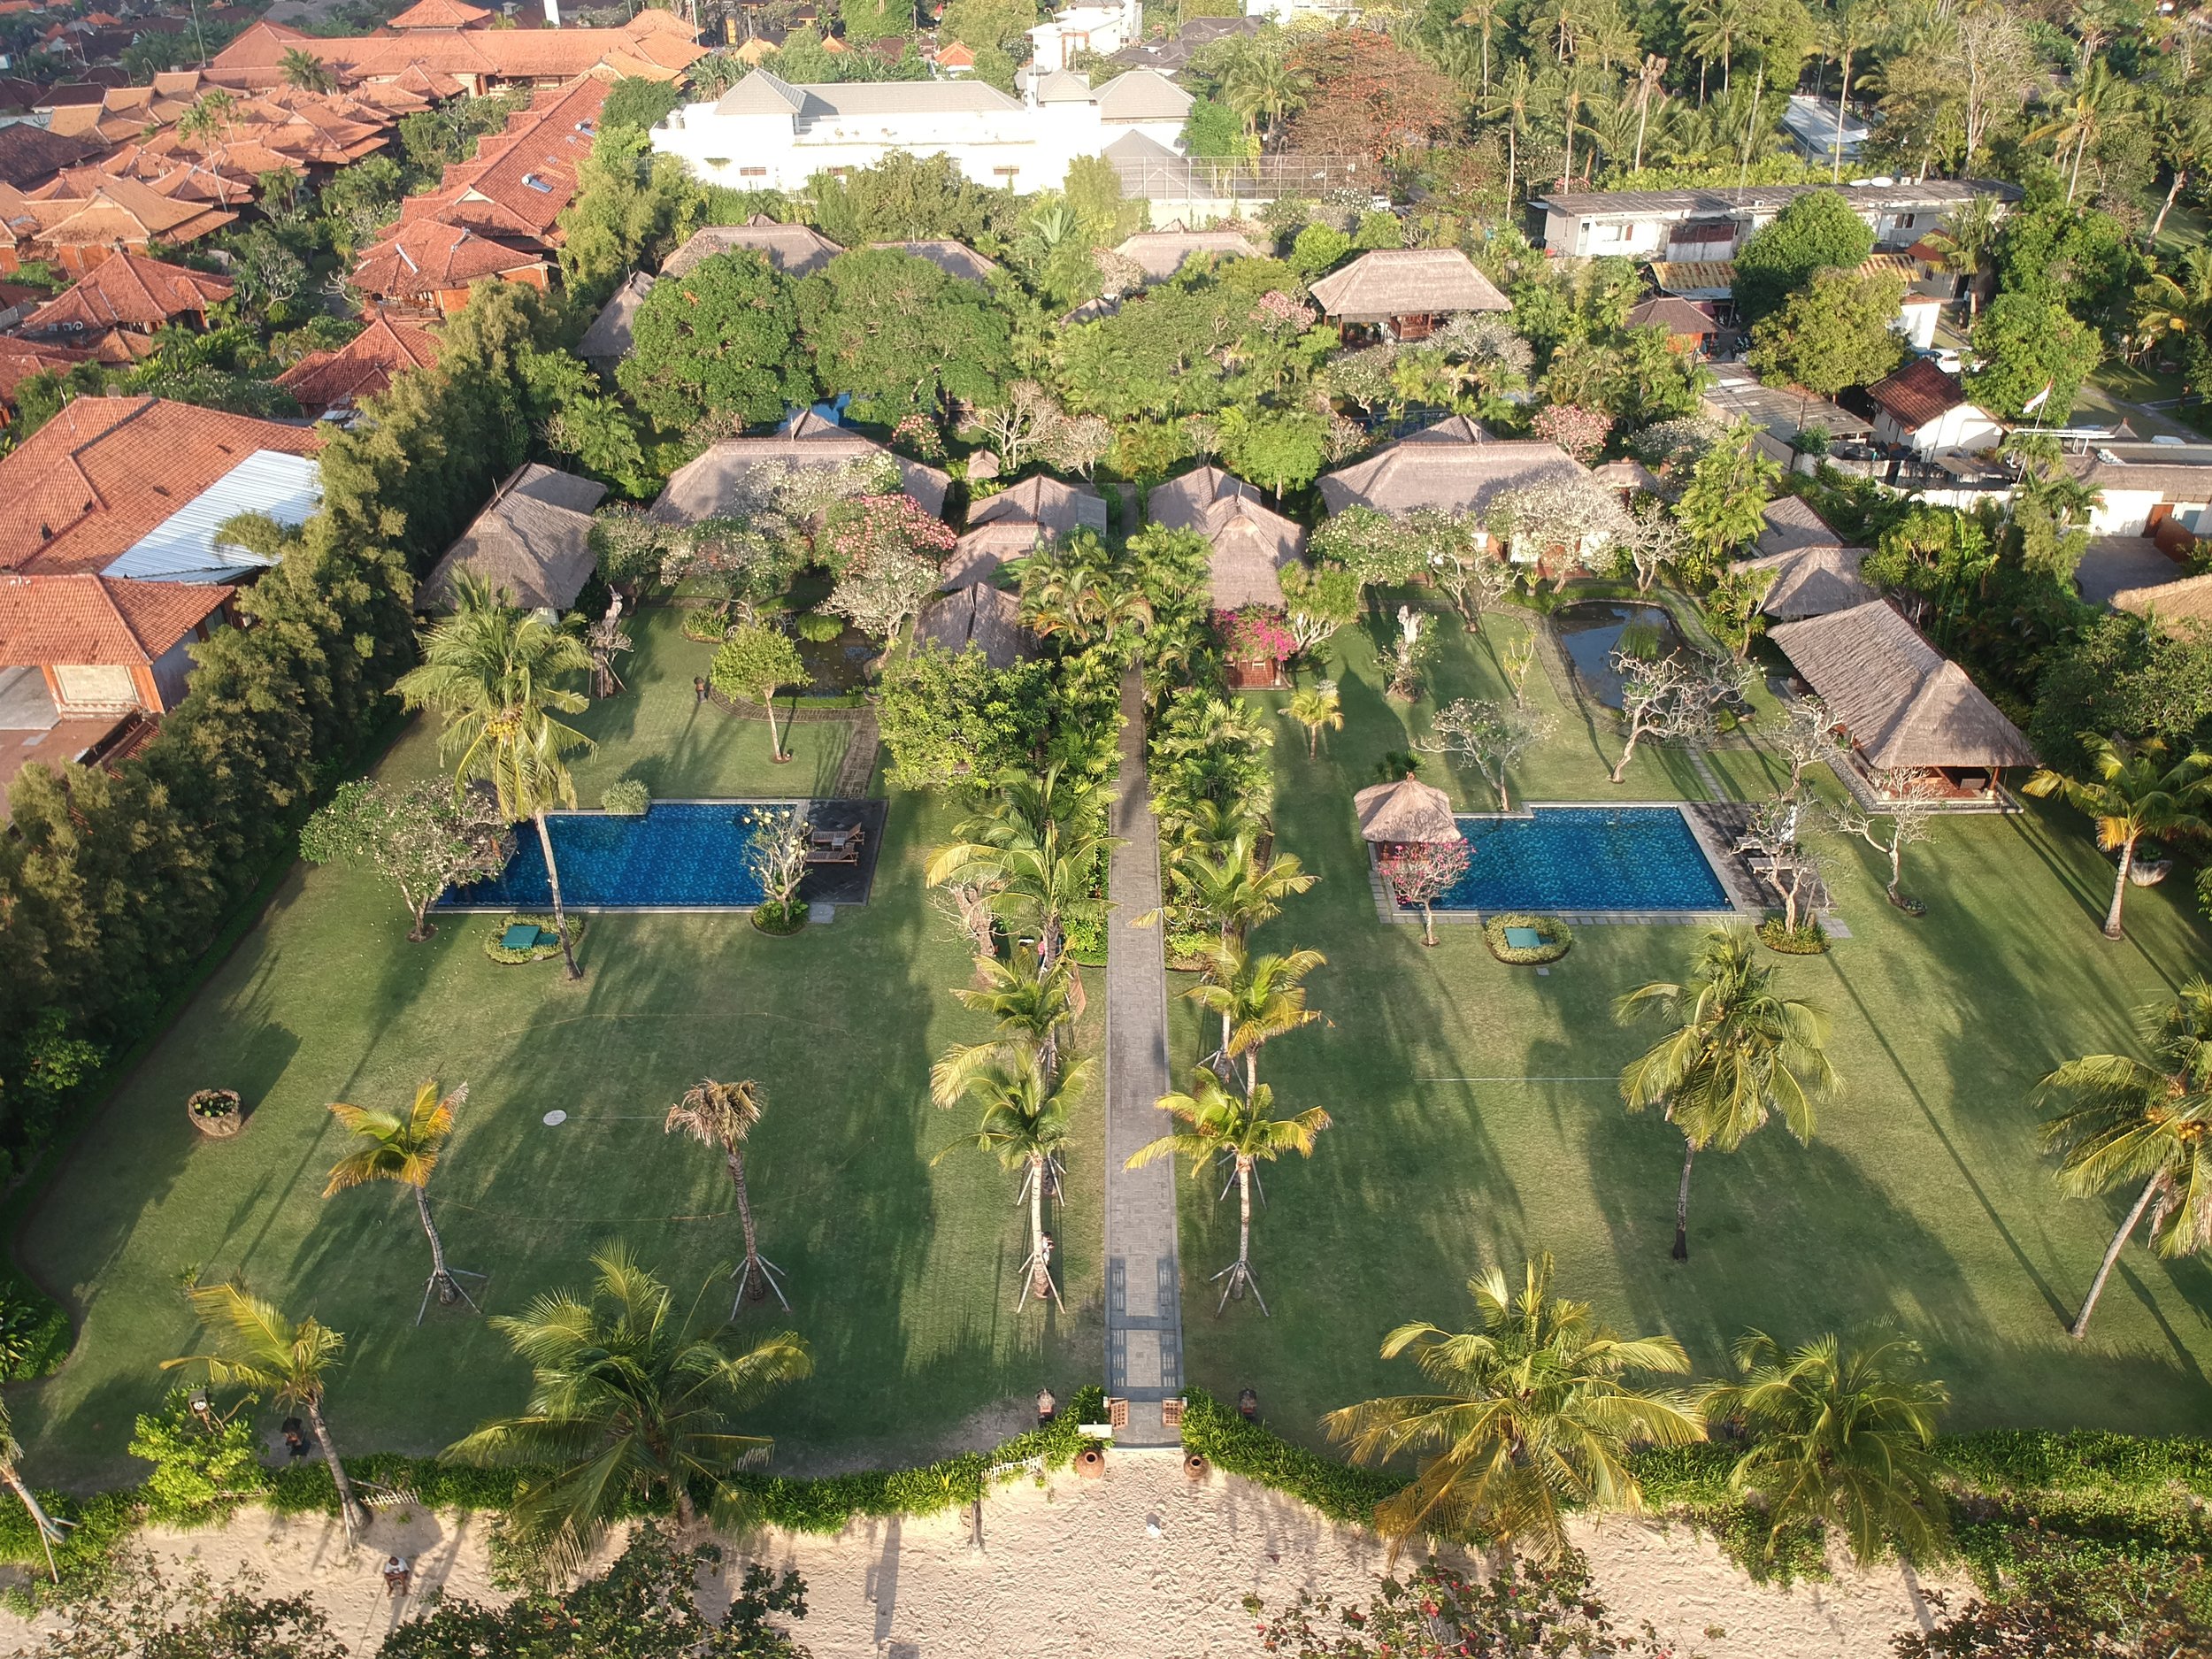 Overview of Villa Hanani, Image from A Tent in Bali